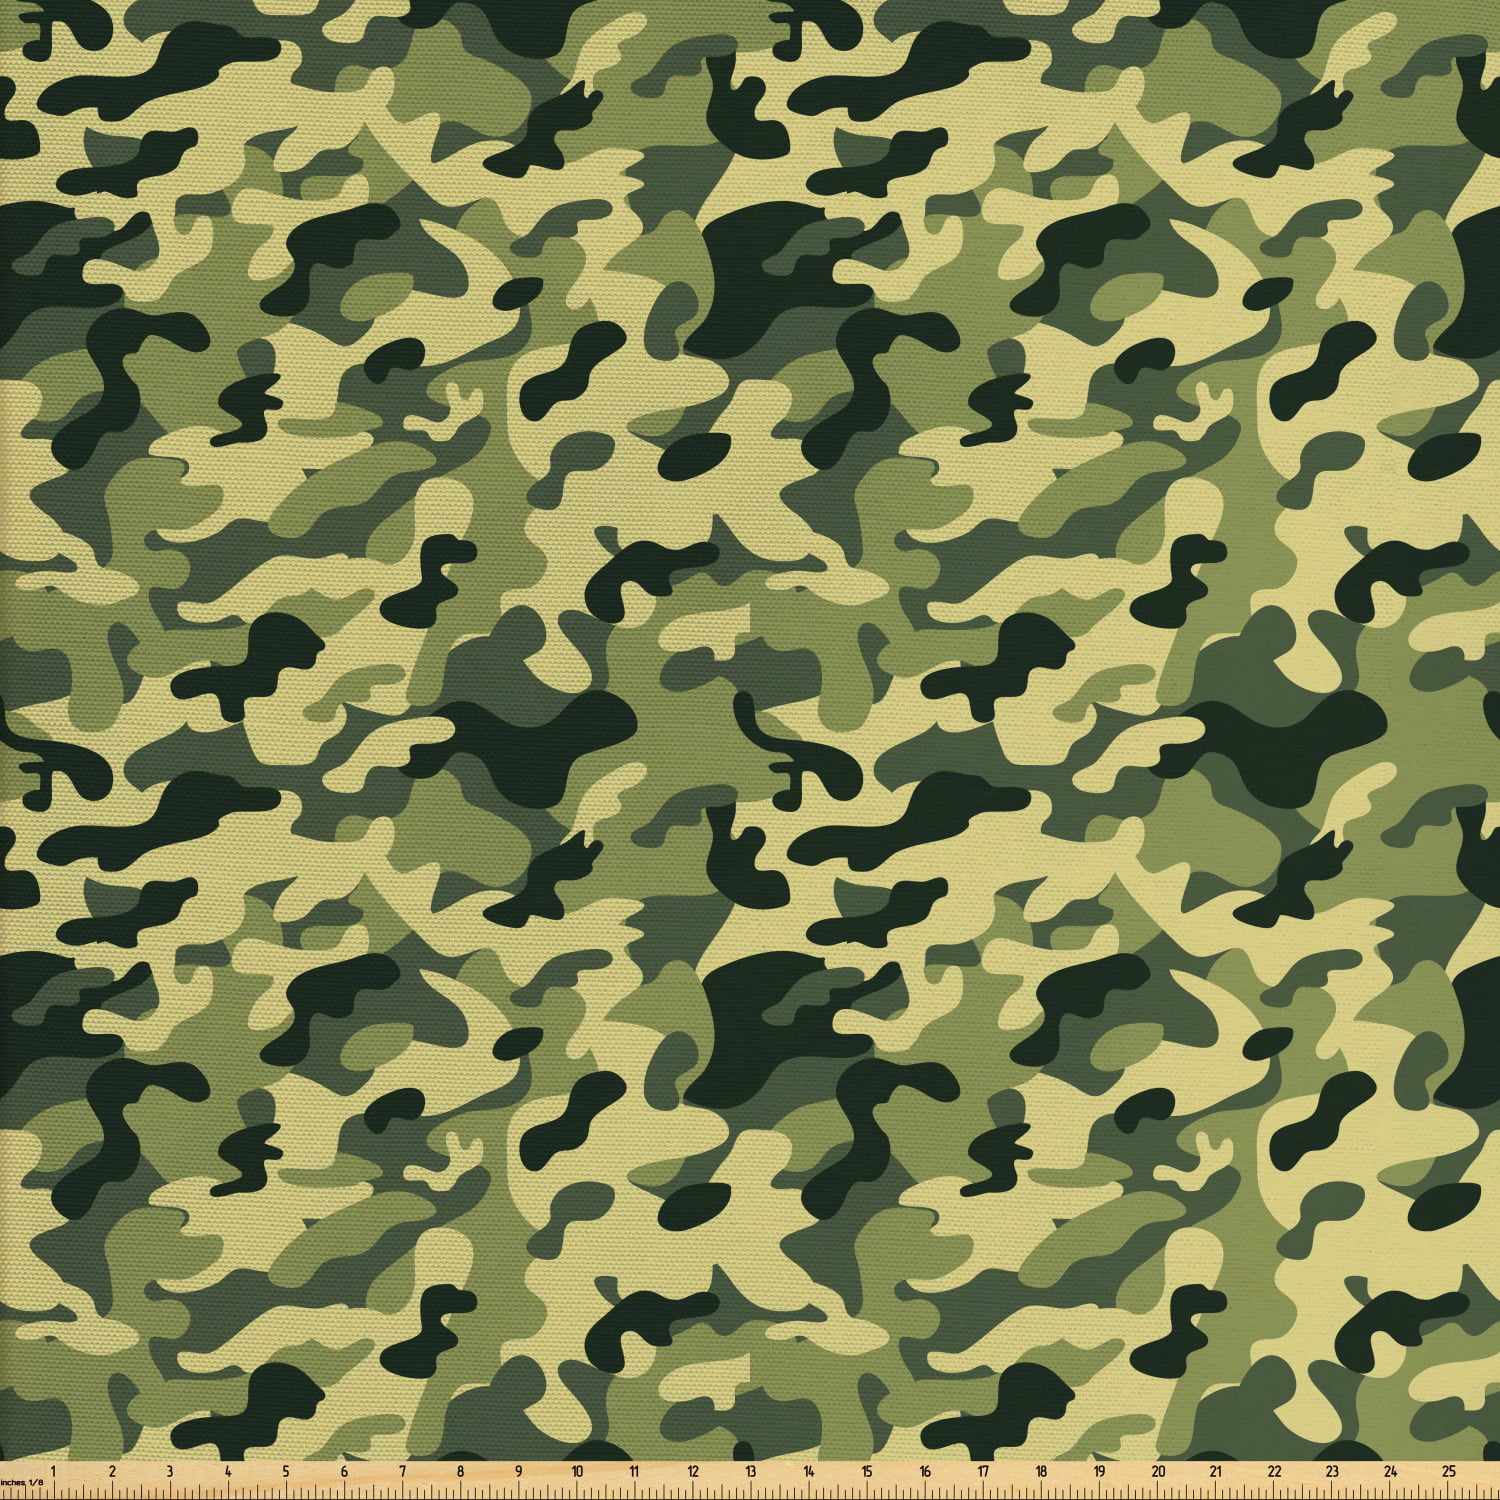 Camouflage Fabric by The Yard, Clothing Motif with Pale Toned Color ...